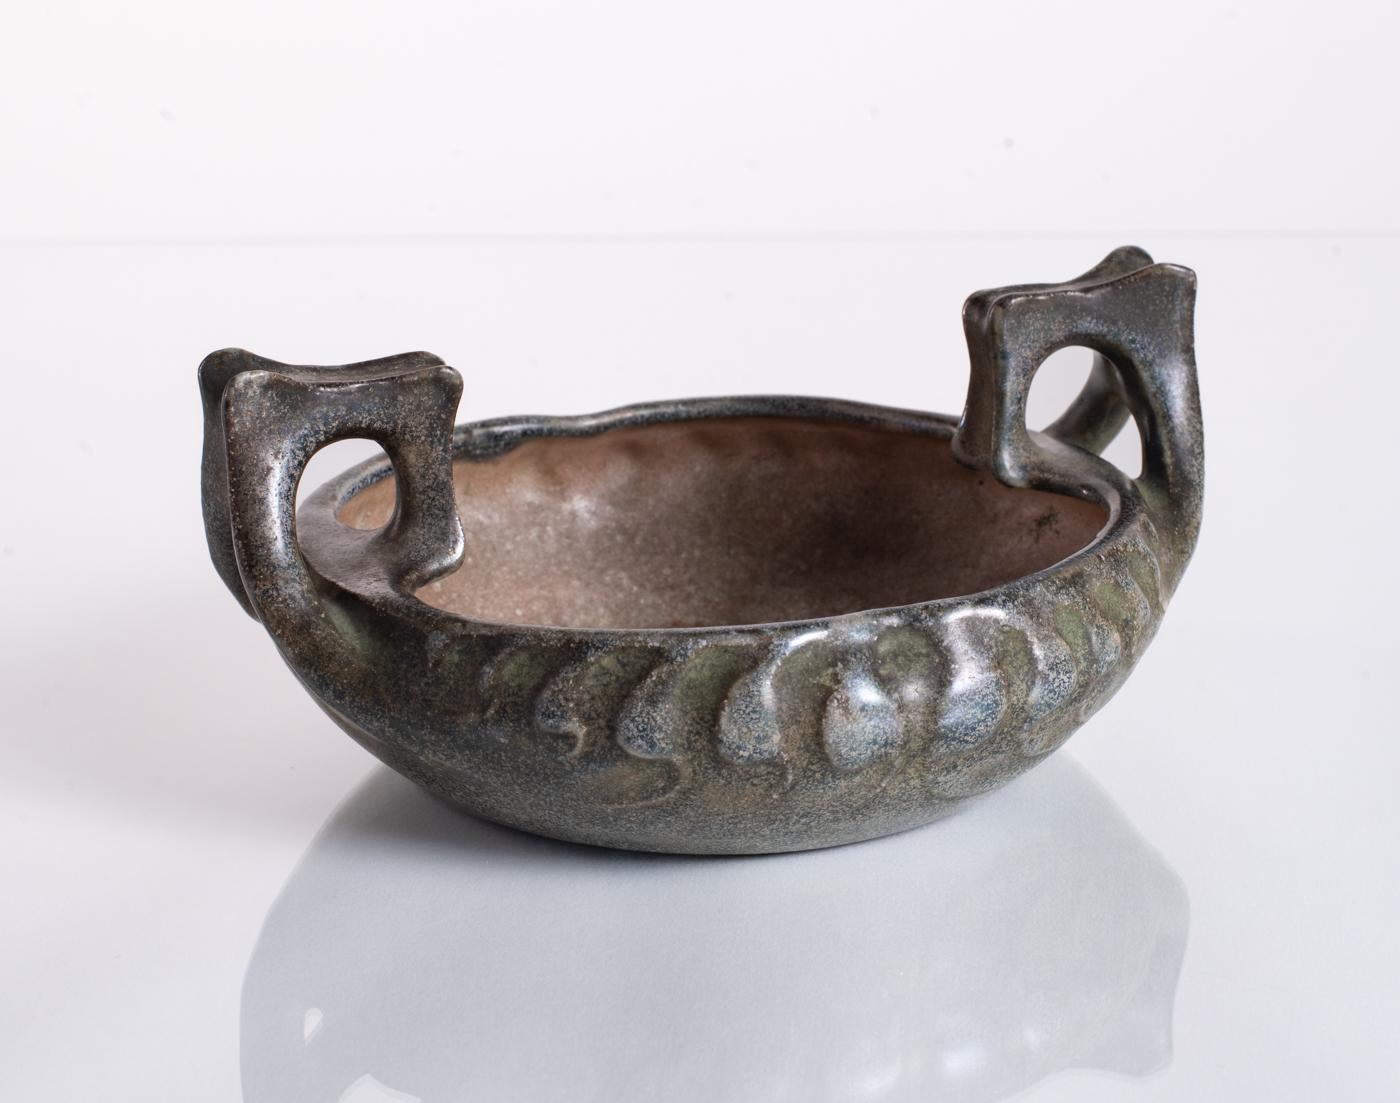 A shallow naturalistic bowl with organic bone-like design elements and a mottled glaze of blue, gray, and green. Stamped Amphora in the base, and numbered; added RStK bottom marking indicates this piece was hand-finished on the potter's wheel.